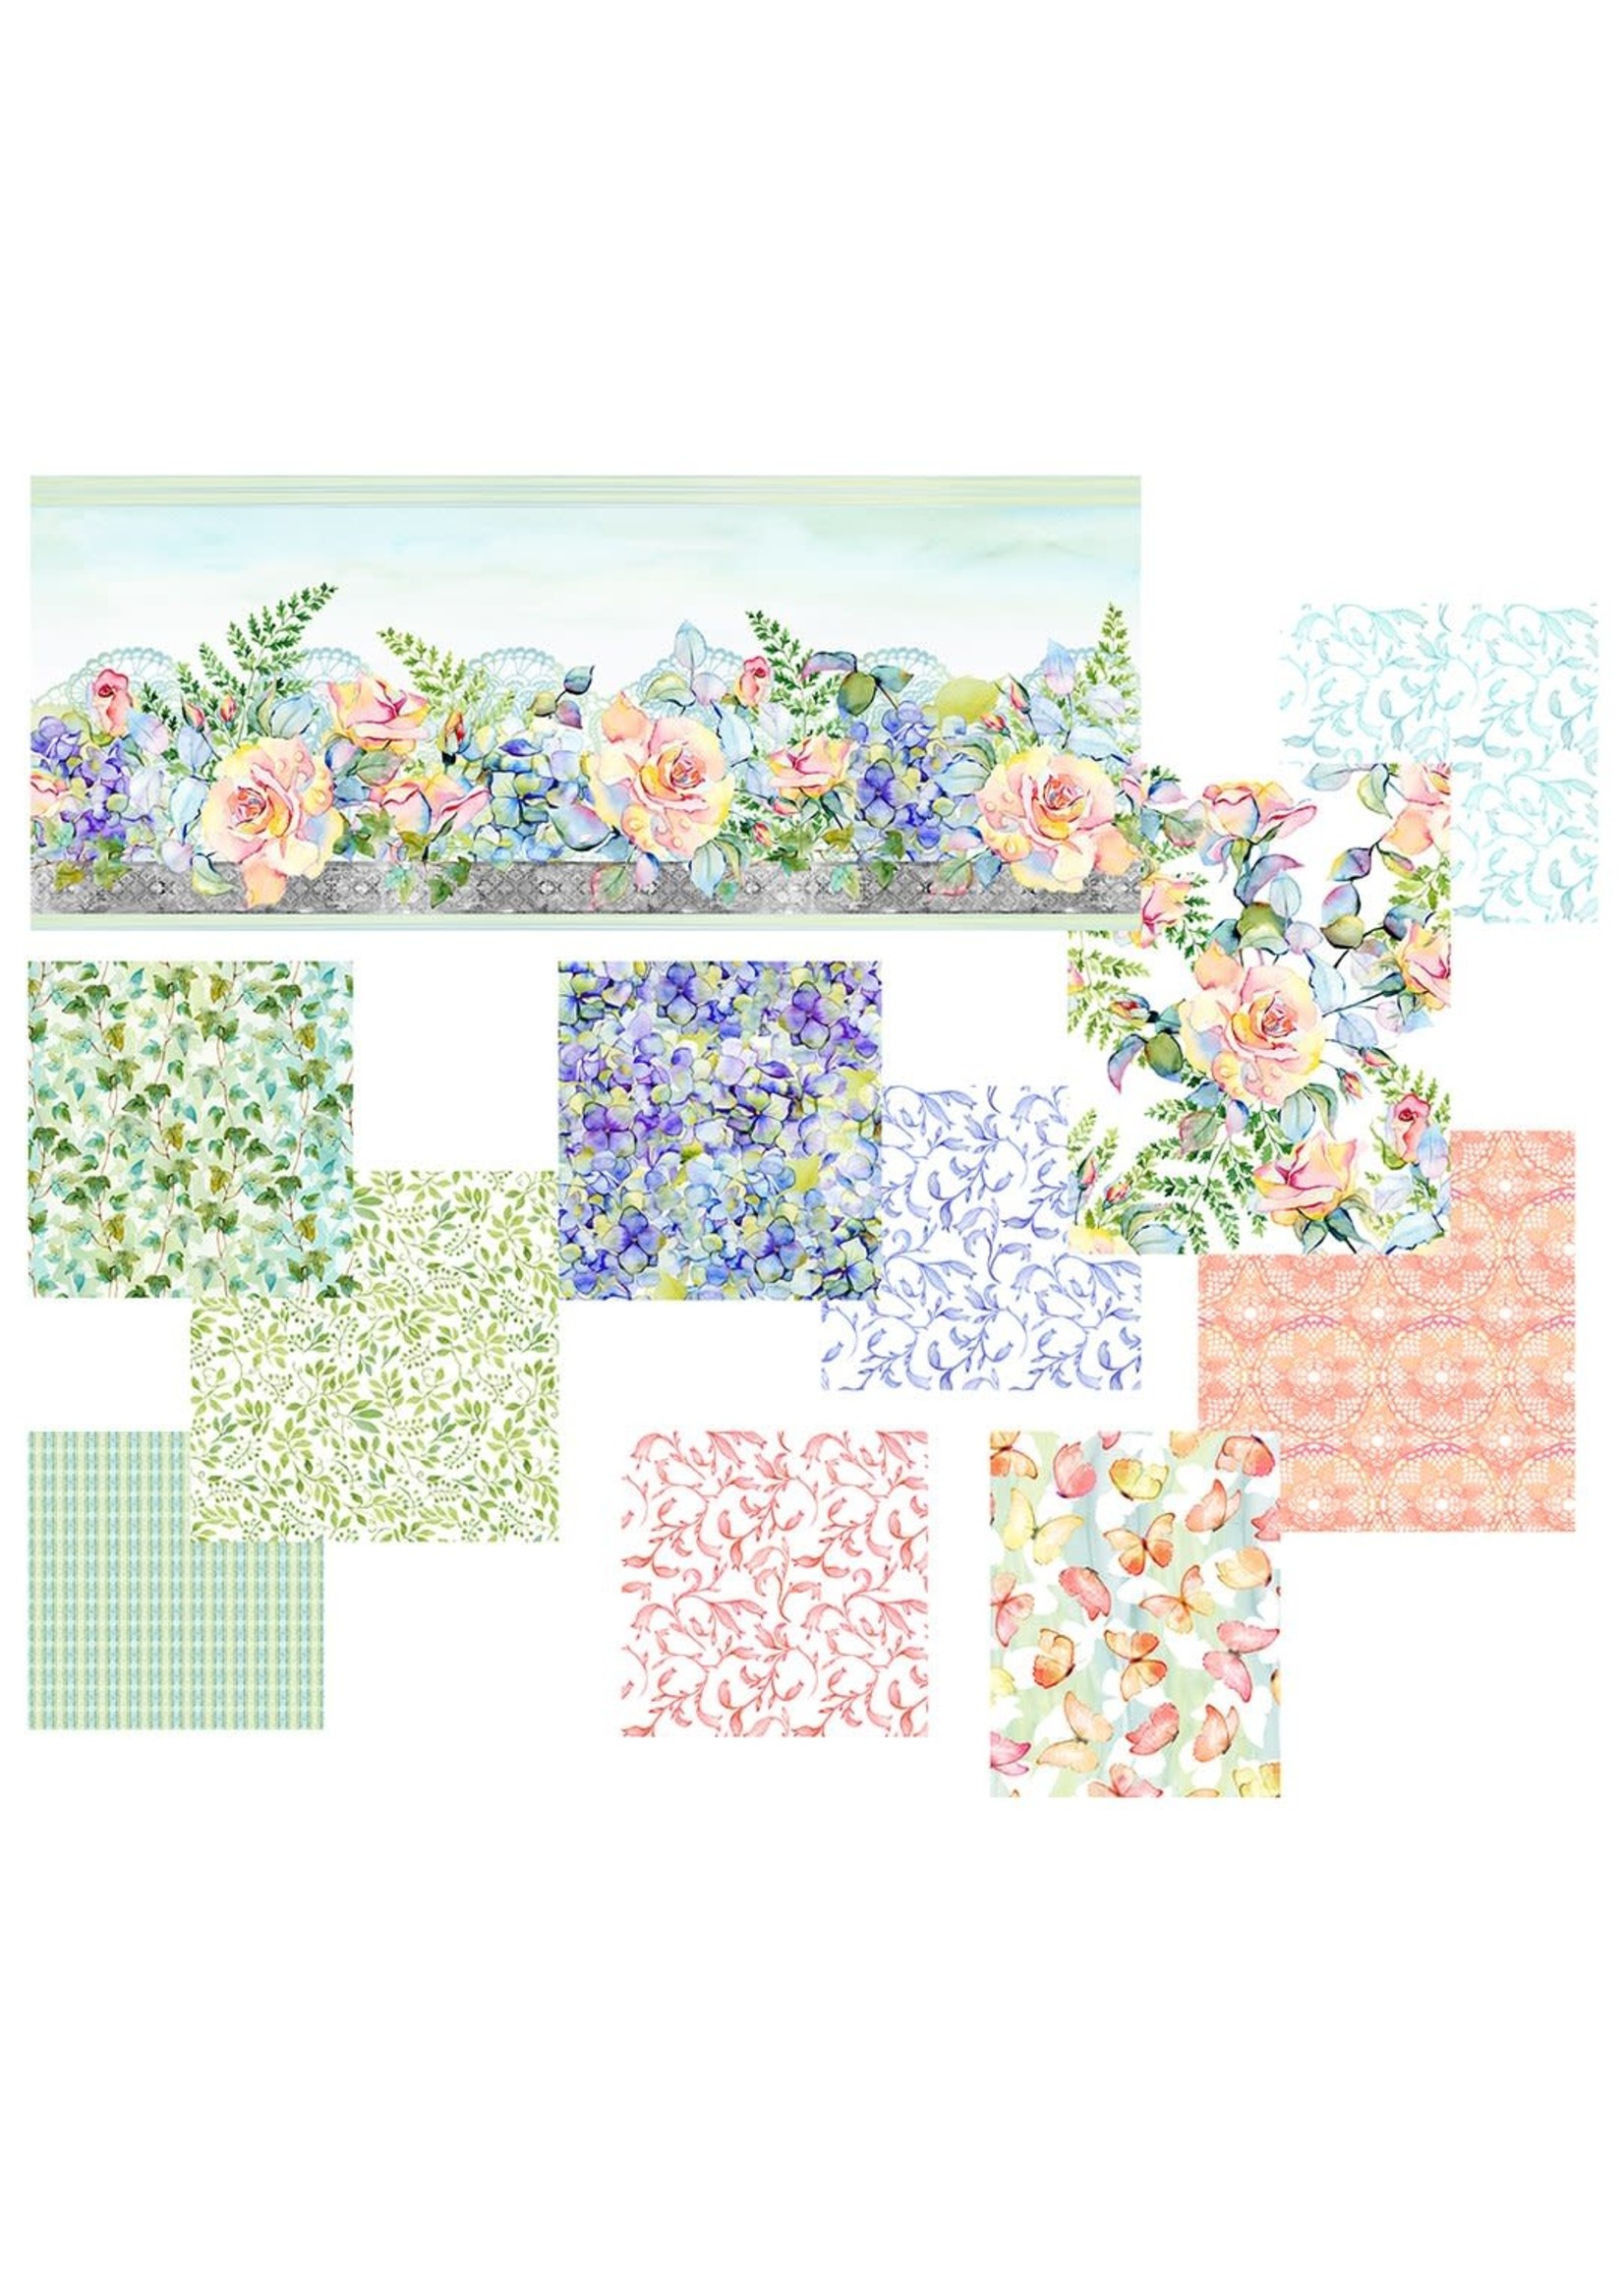 The Patricia Collection - Large Roses - Soft Multi